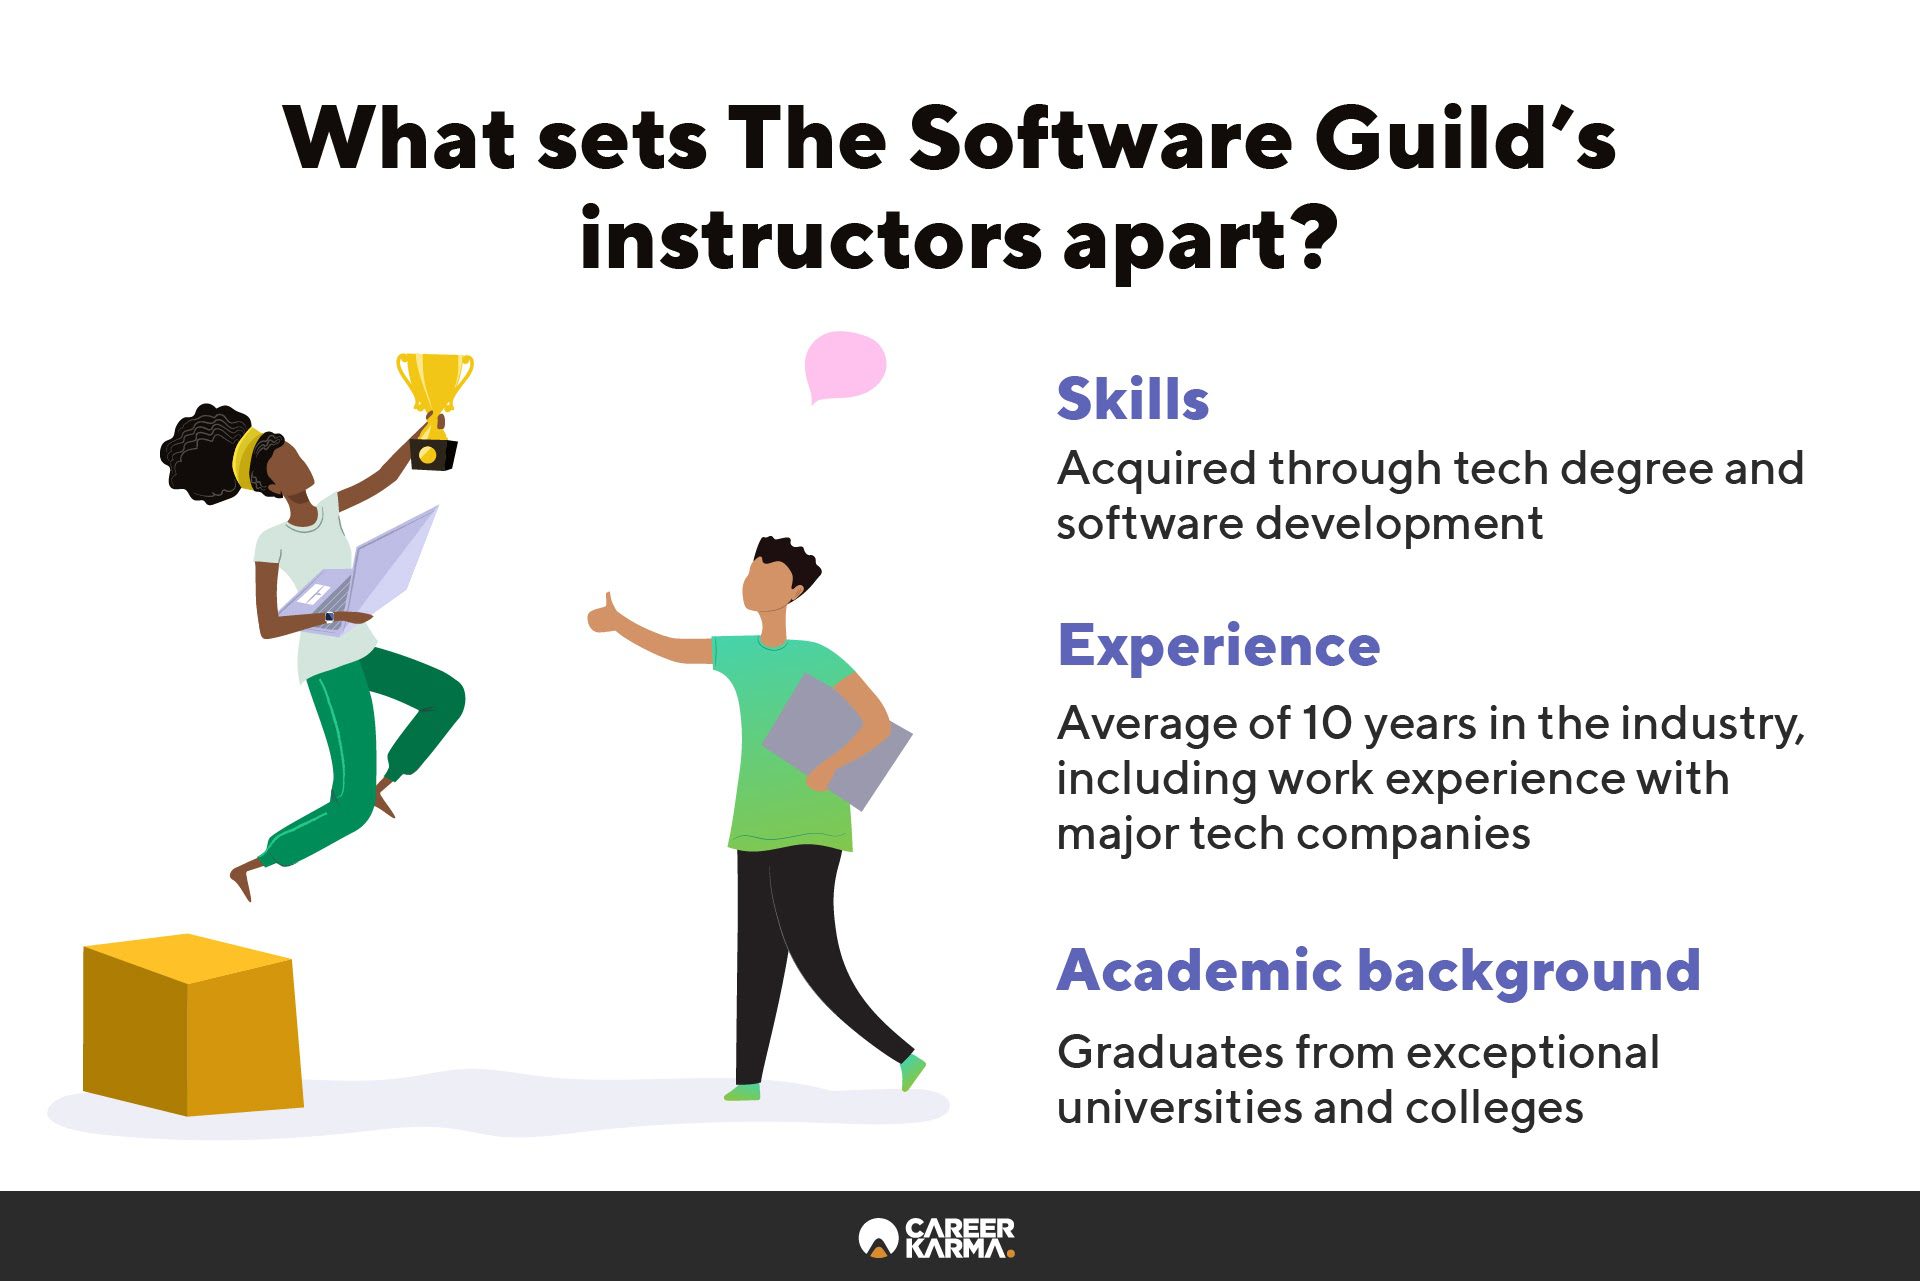 An infographic covering the key assets of The Software Guild instructors